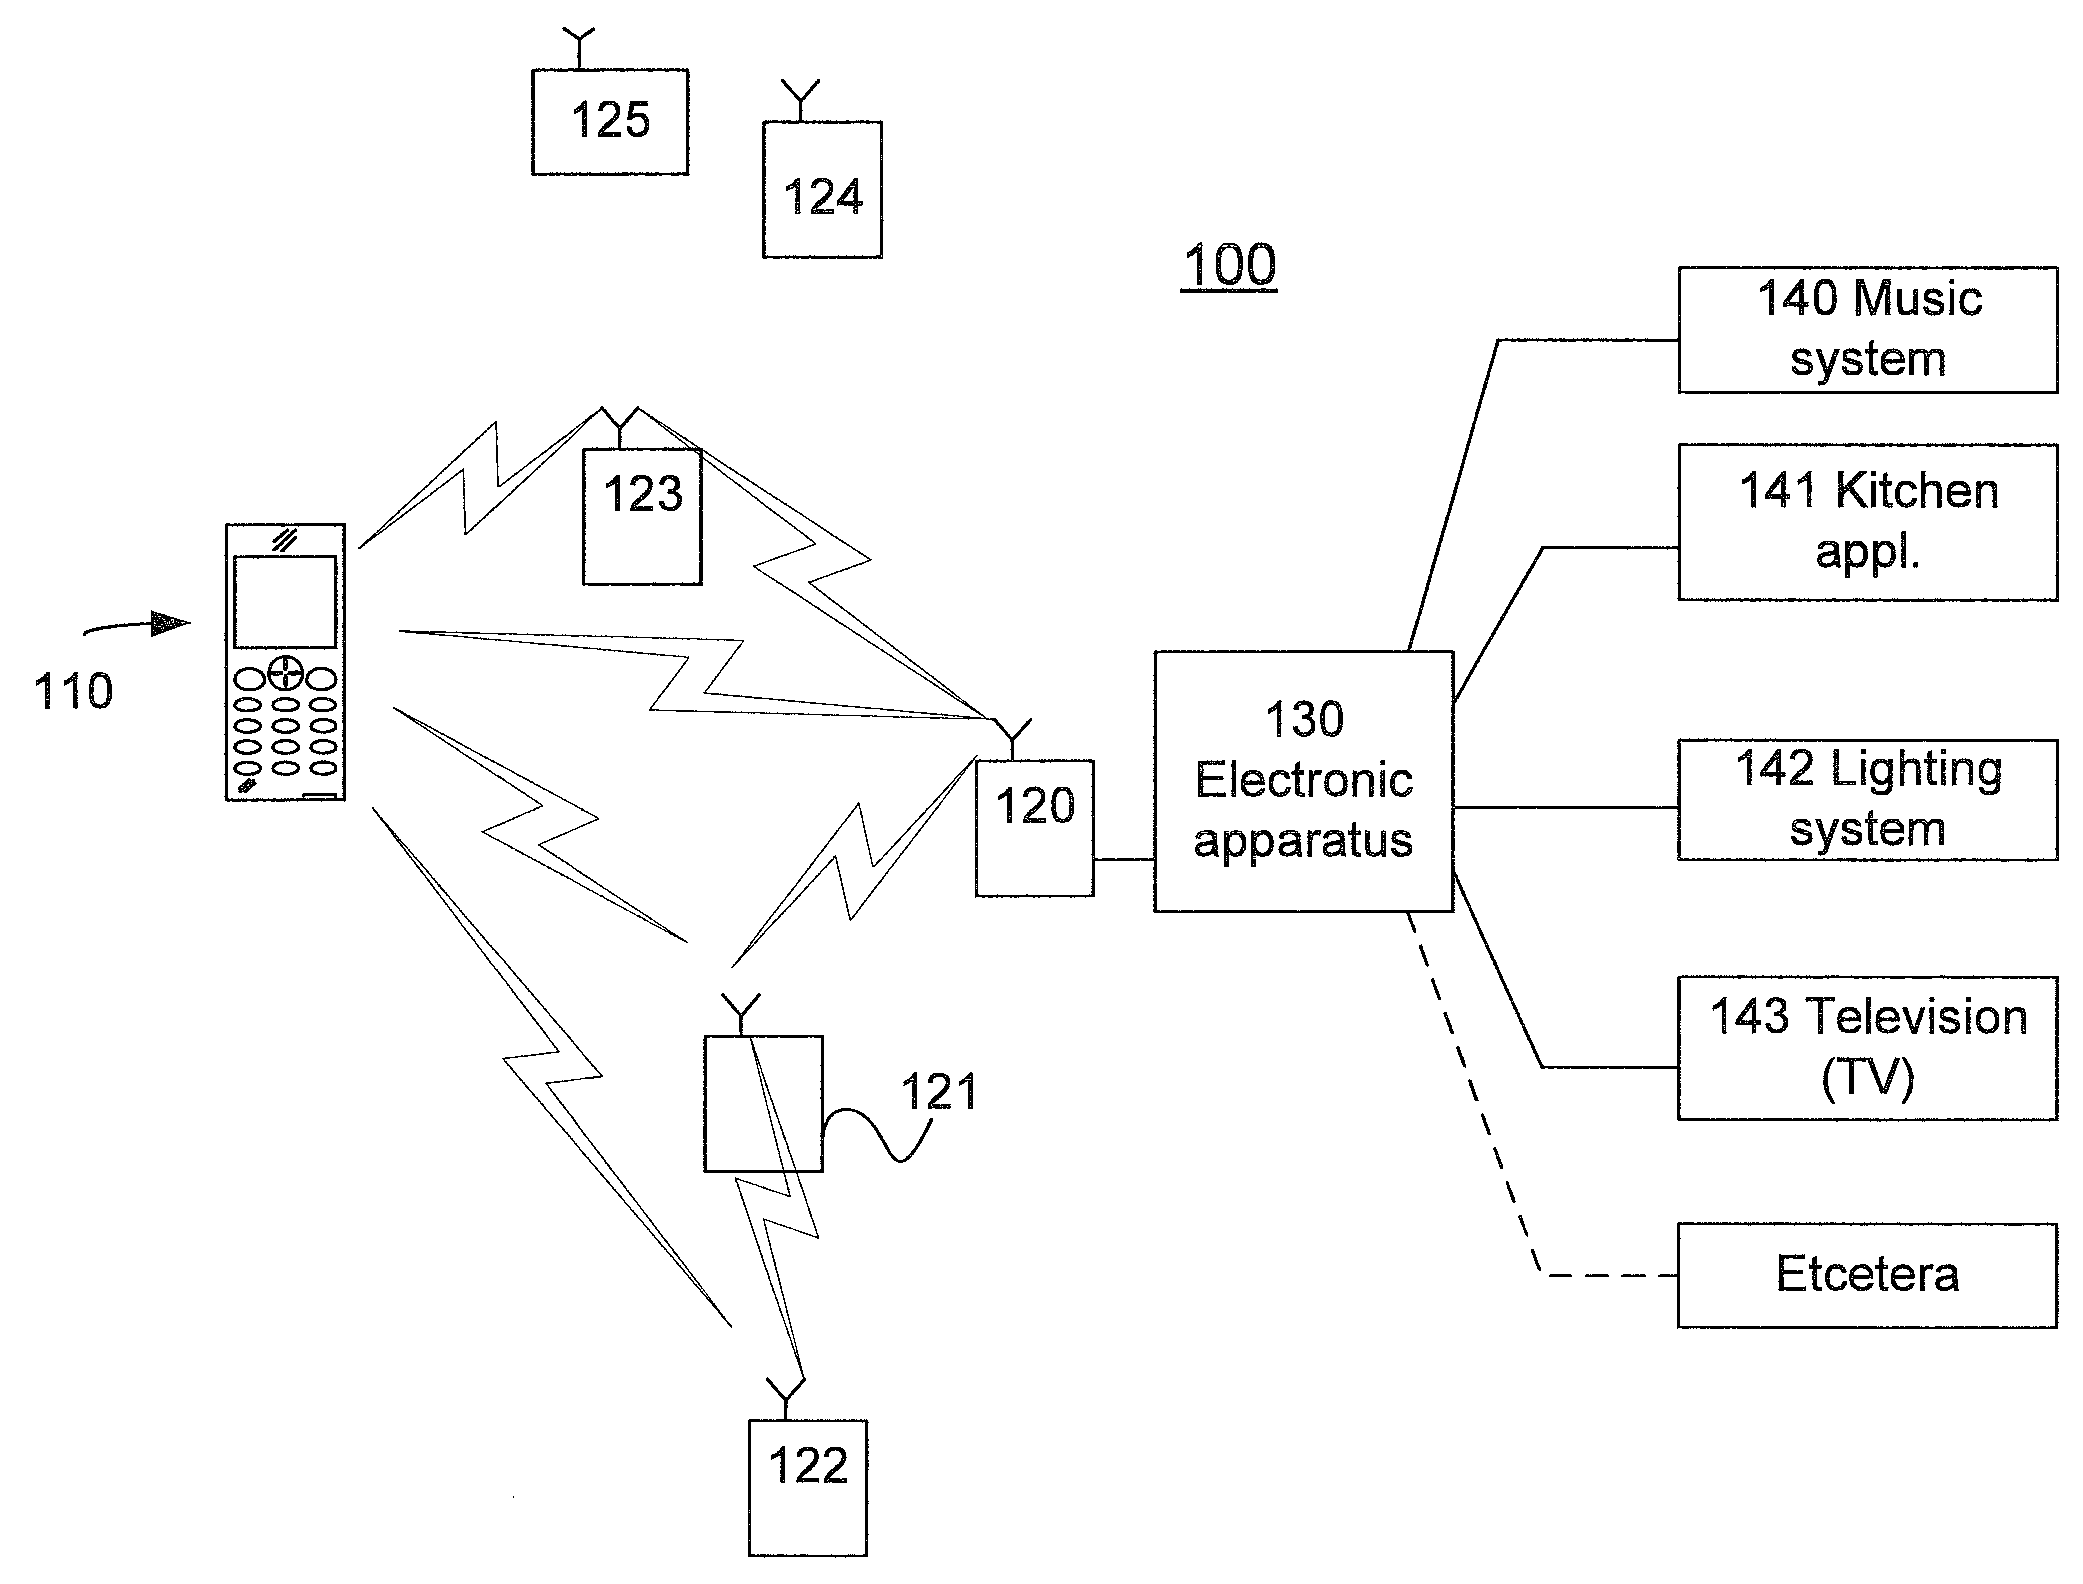 System, methods, devices and computer program products for controlling electronic appliances within a local area